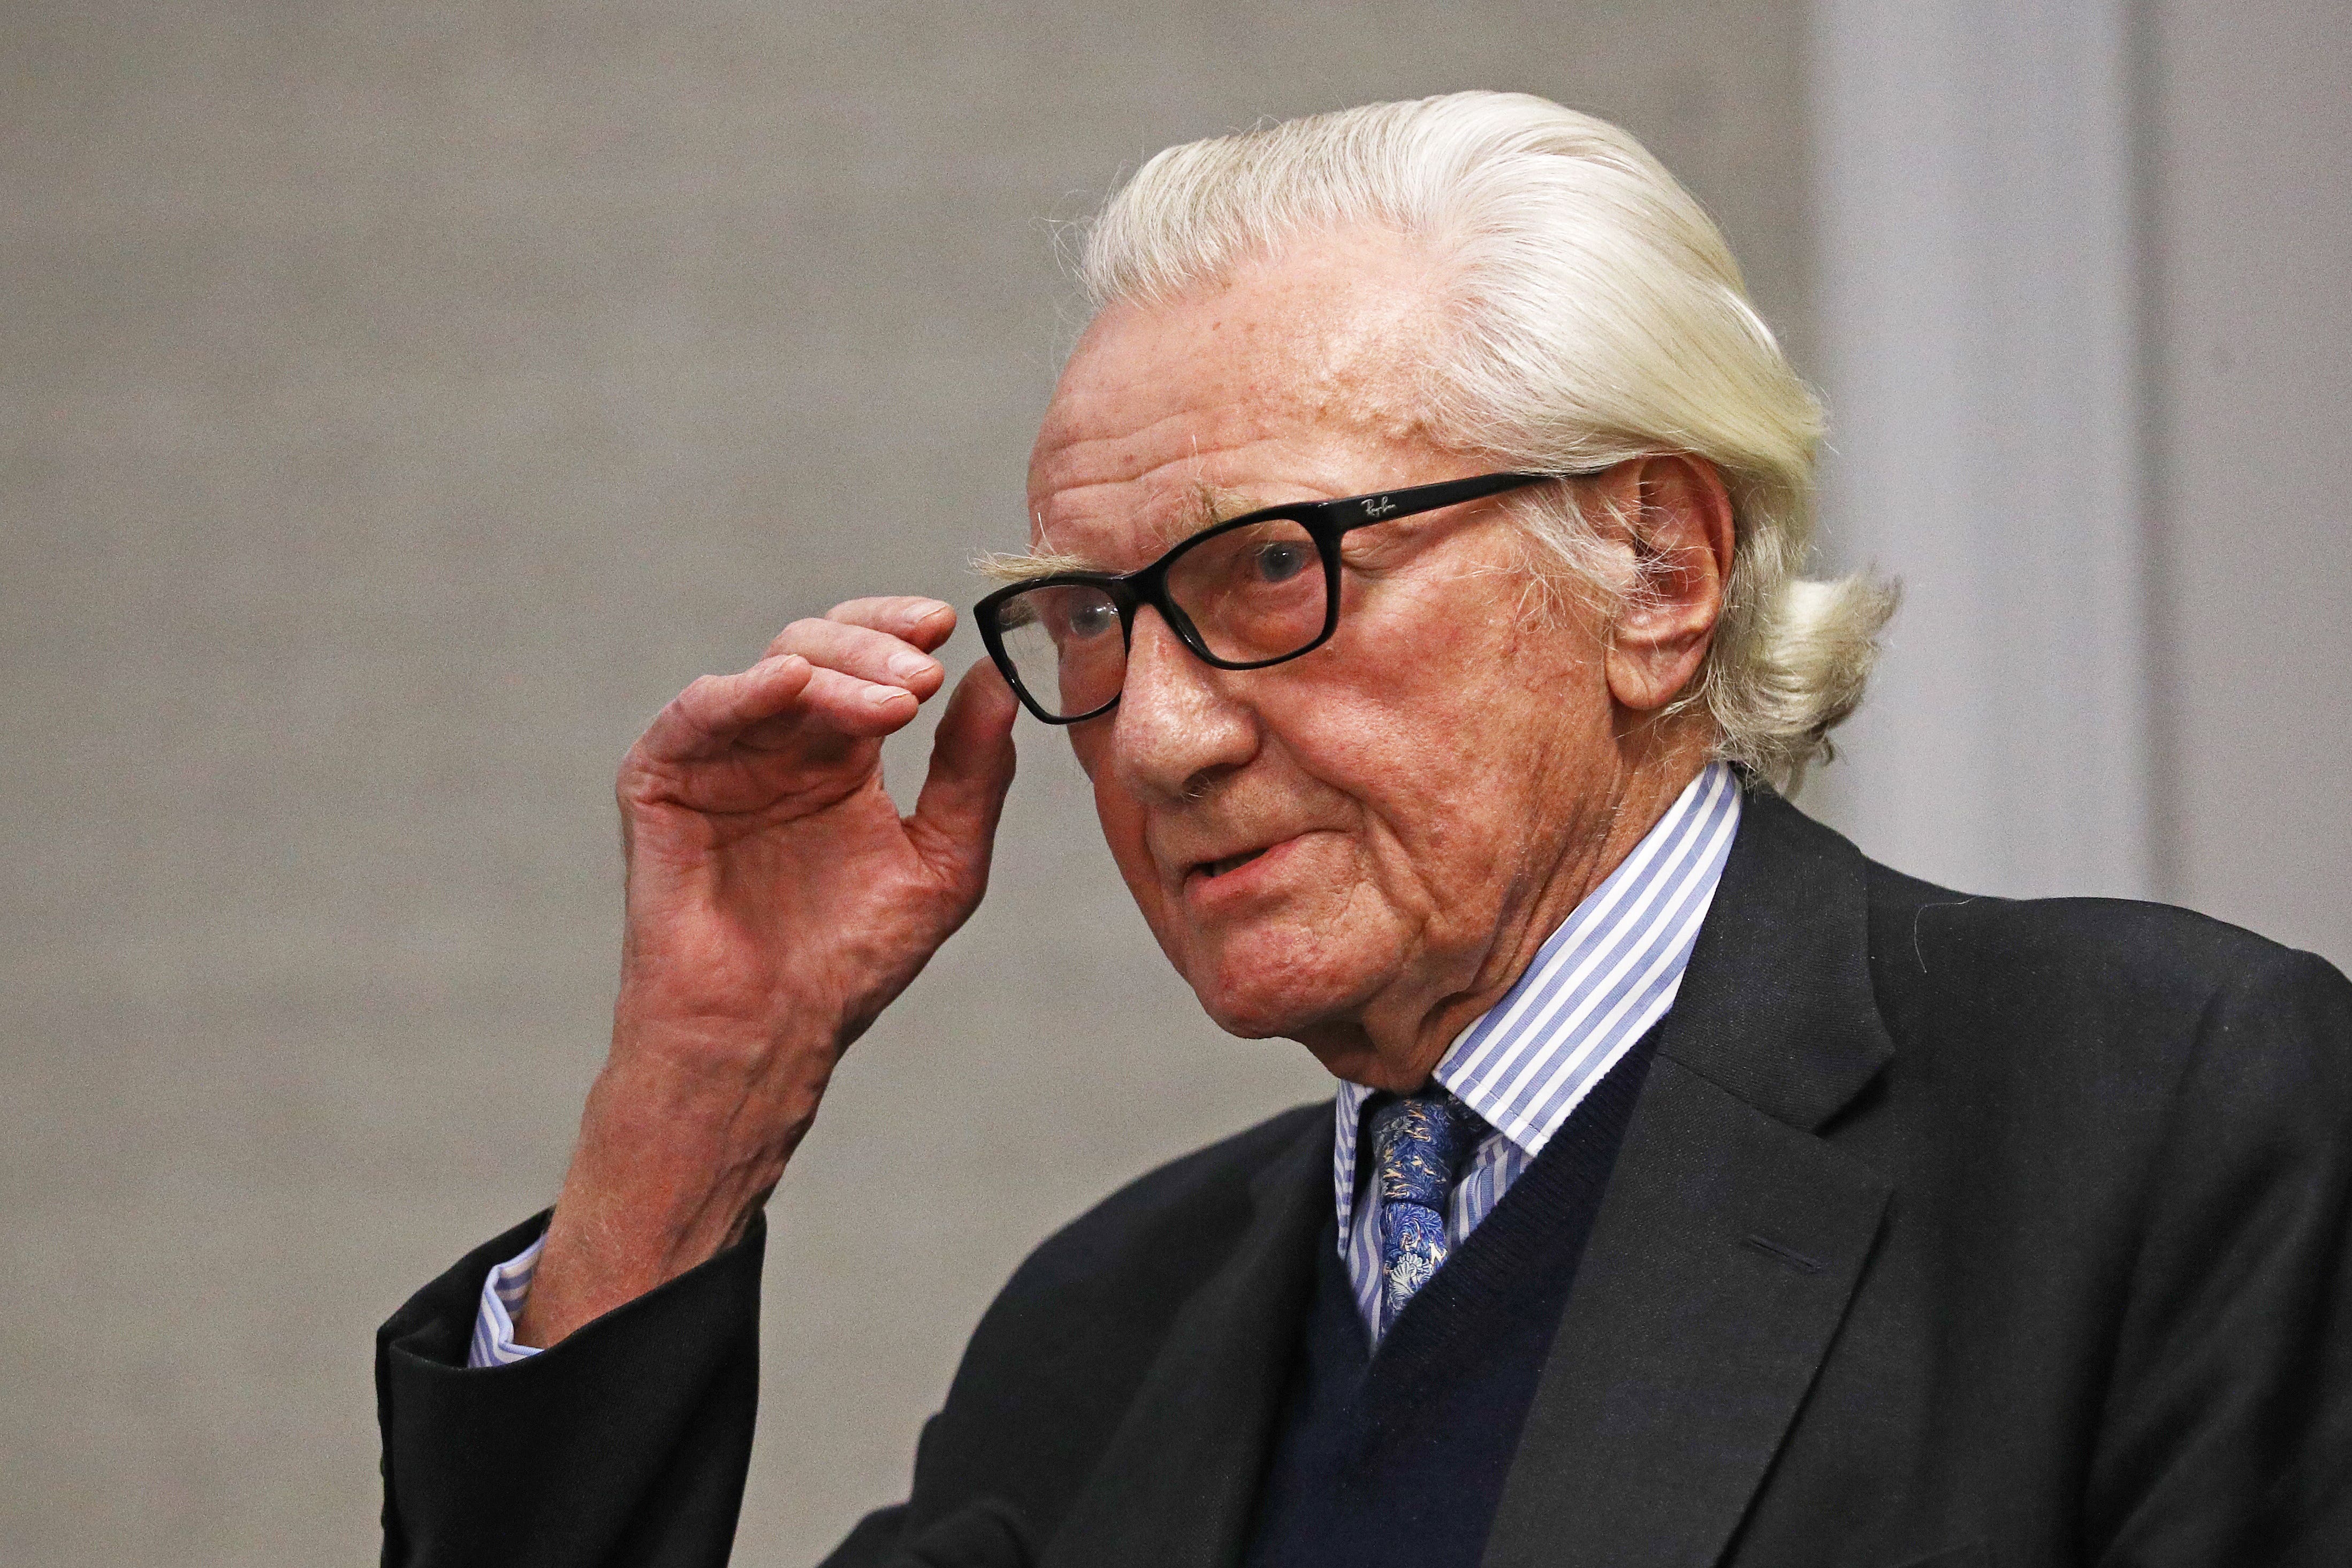 Michael Heseltine warns election campaign will be ‘dishonest’